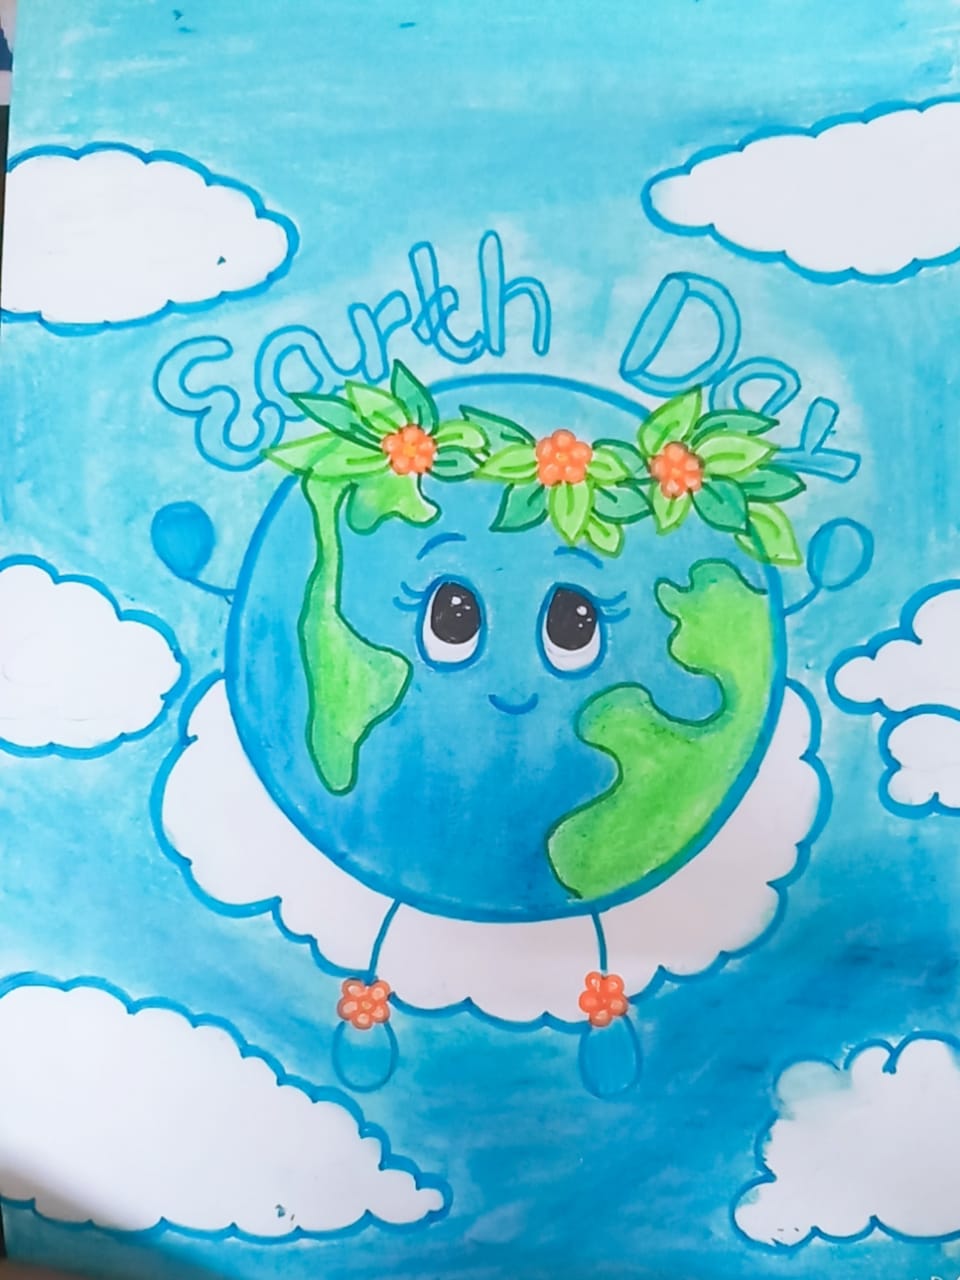 Your Art Our Earth - Earth Day